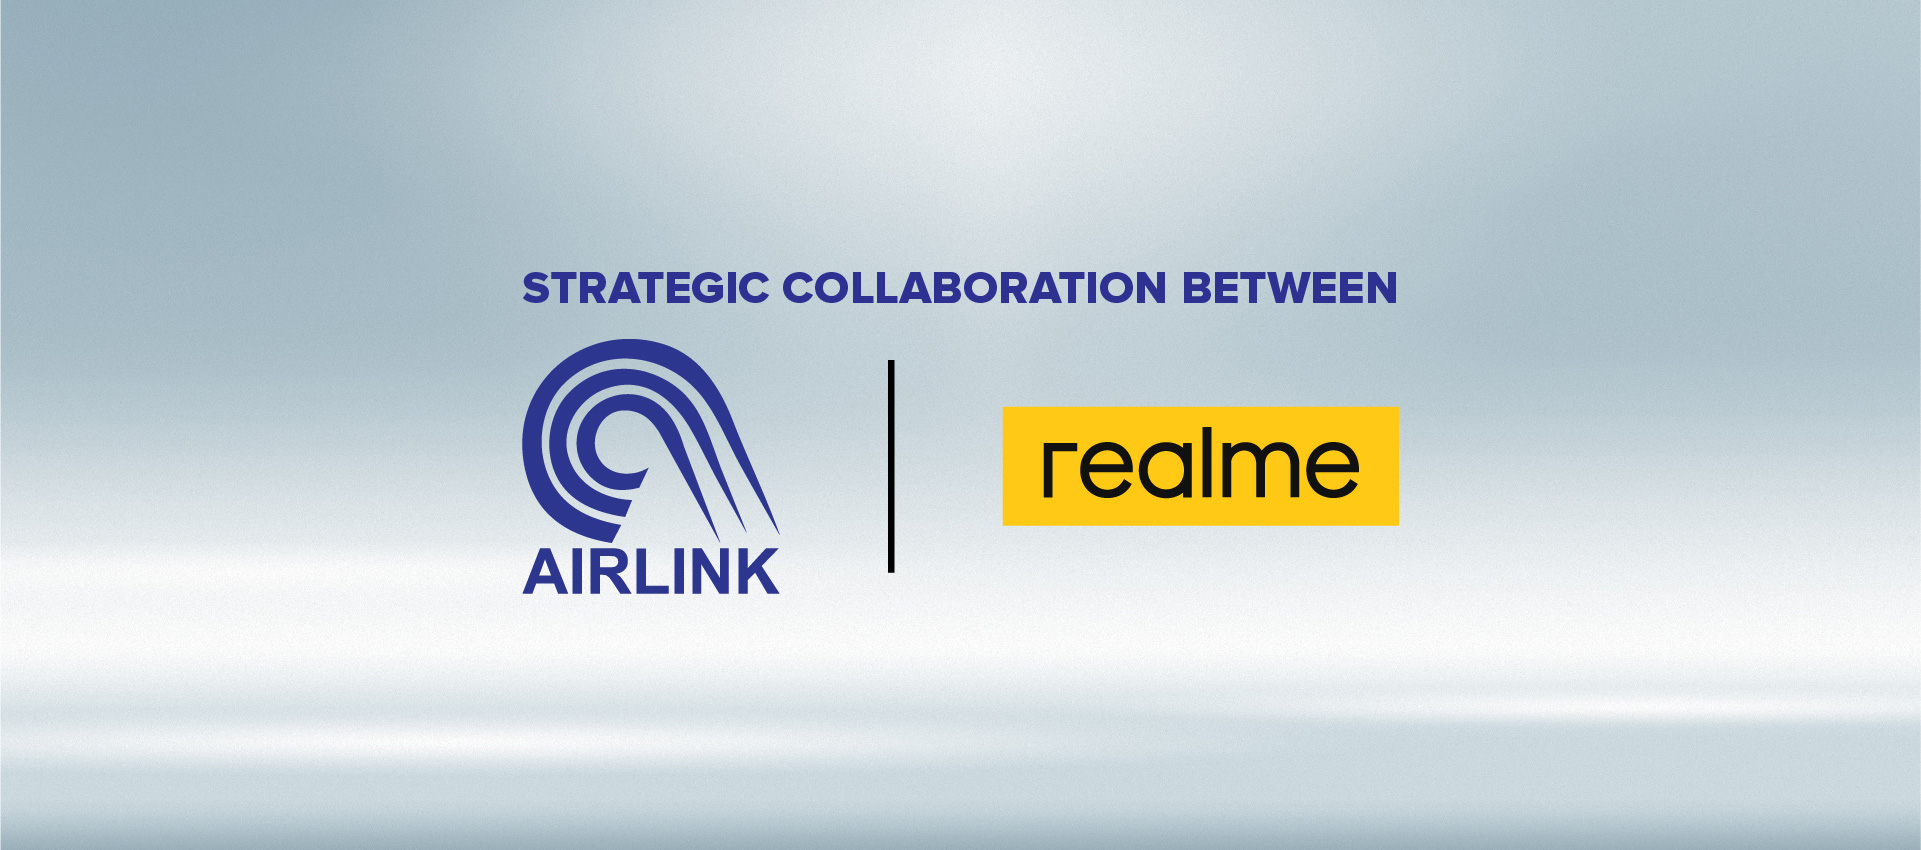 Strategic Collaboration Between Airlink & Realme